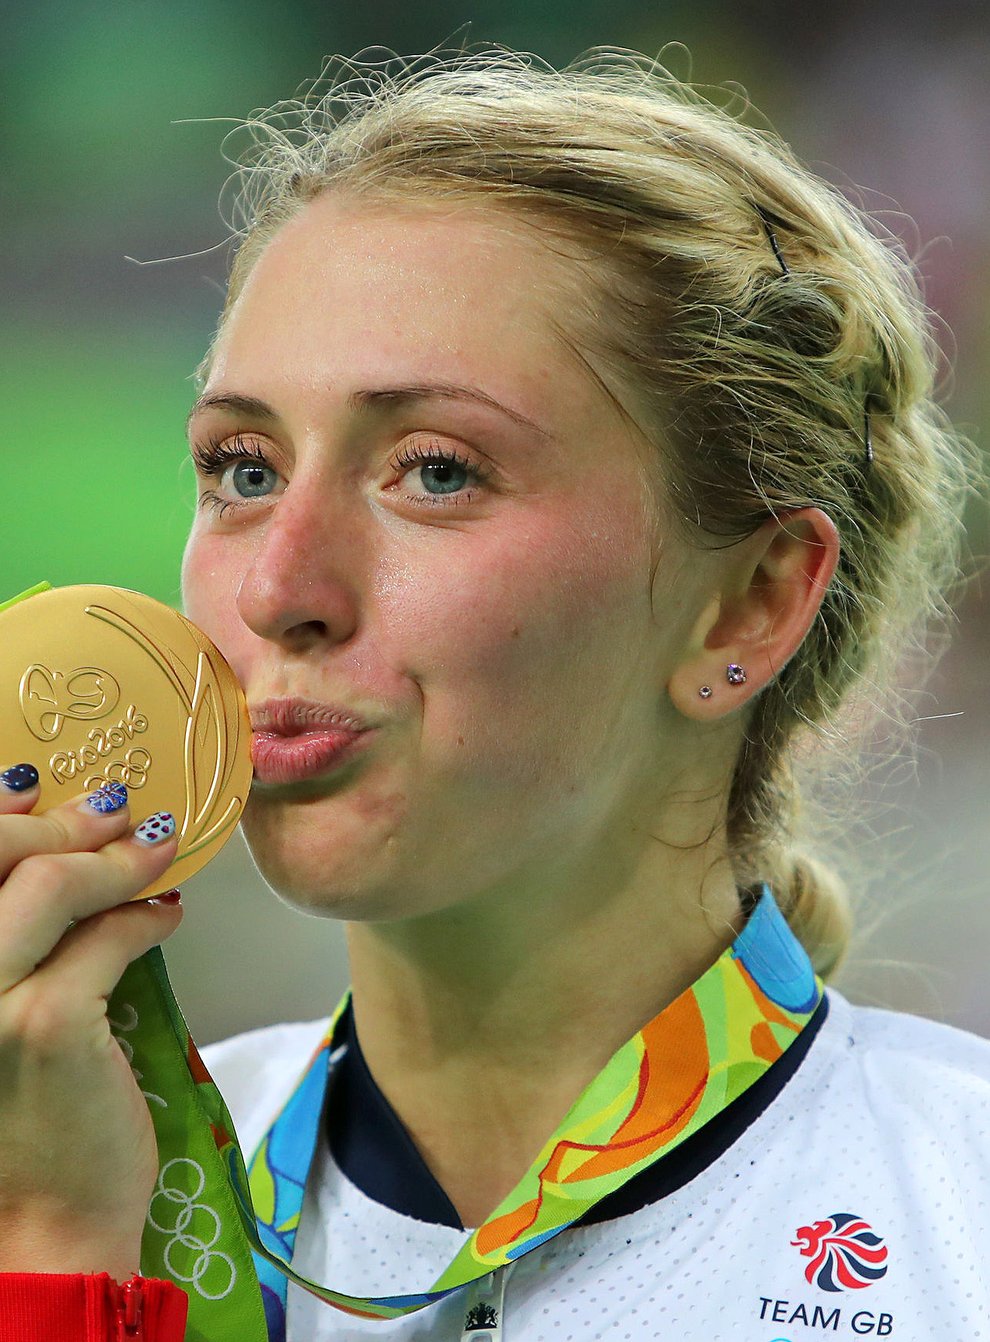 Laura Kenny (nee Trott) was among Team GB's cycling gold medallists in Rio (PA Images)